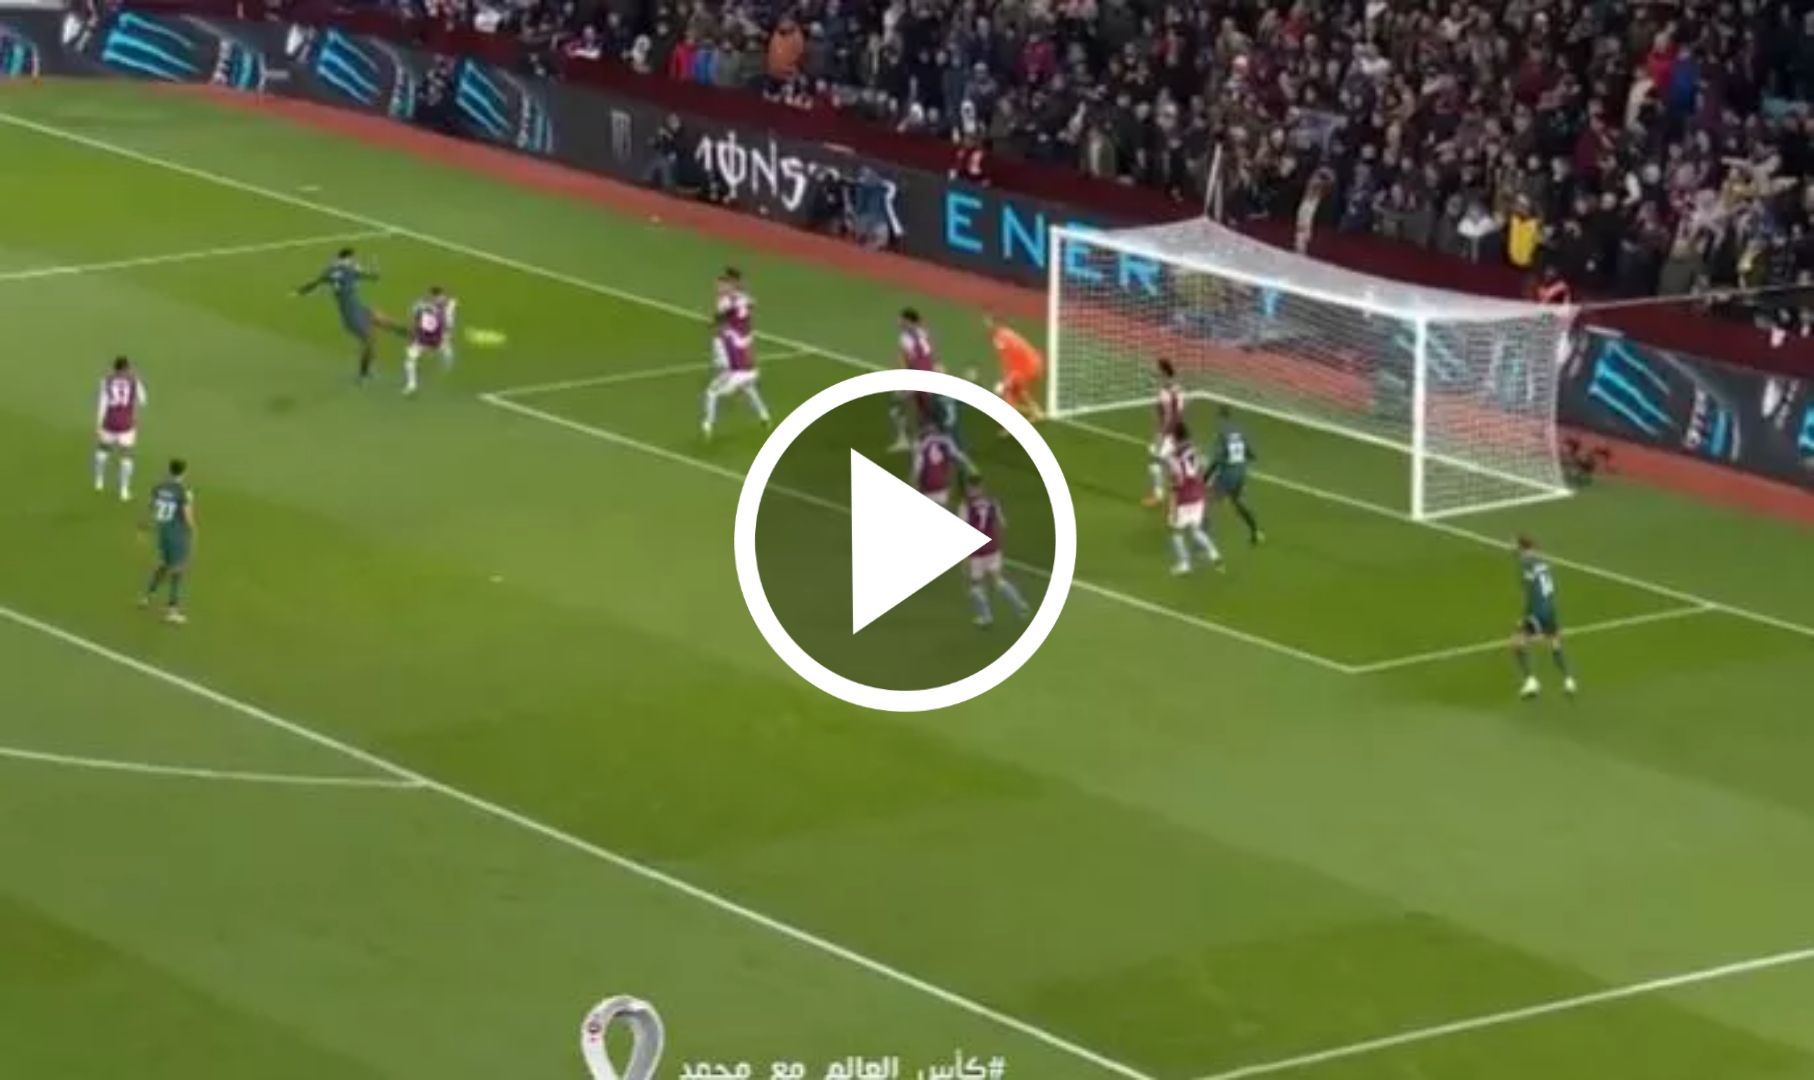 (Video) Goal! - Watch Virgil van Dijk with an incredible volley to double the lead against Aston Villa 1 Sportelo